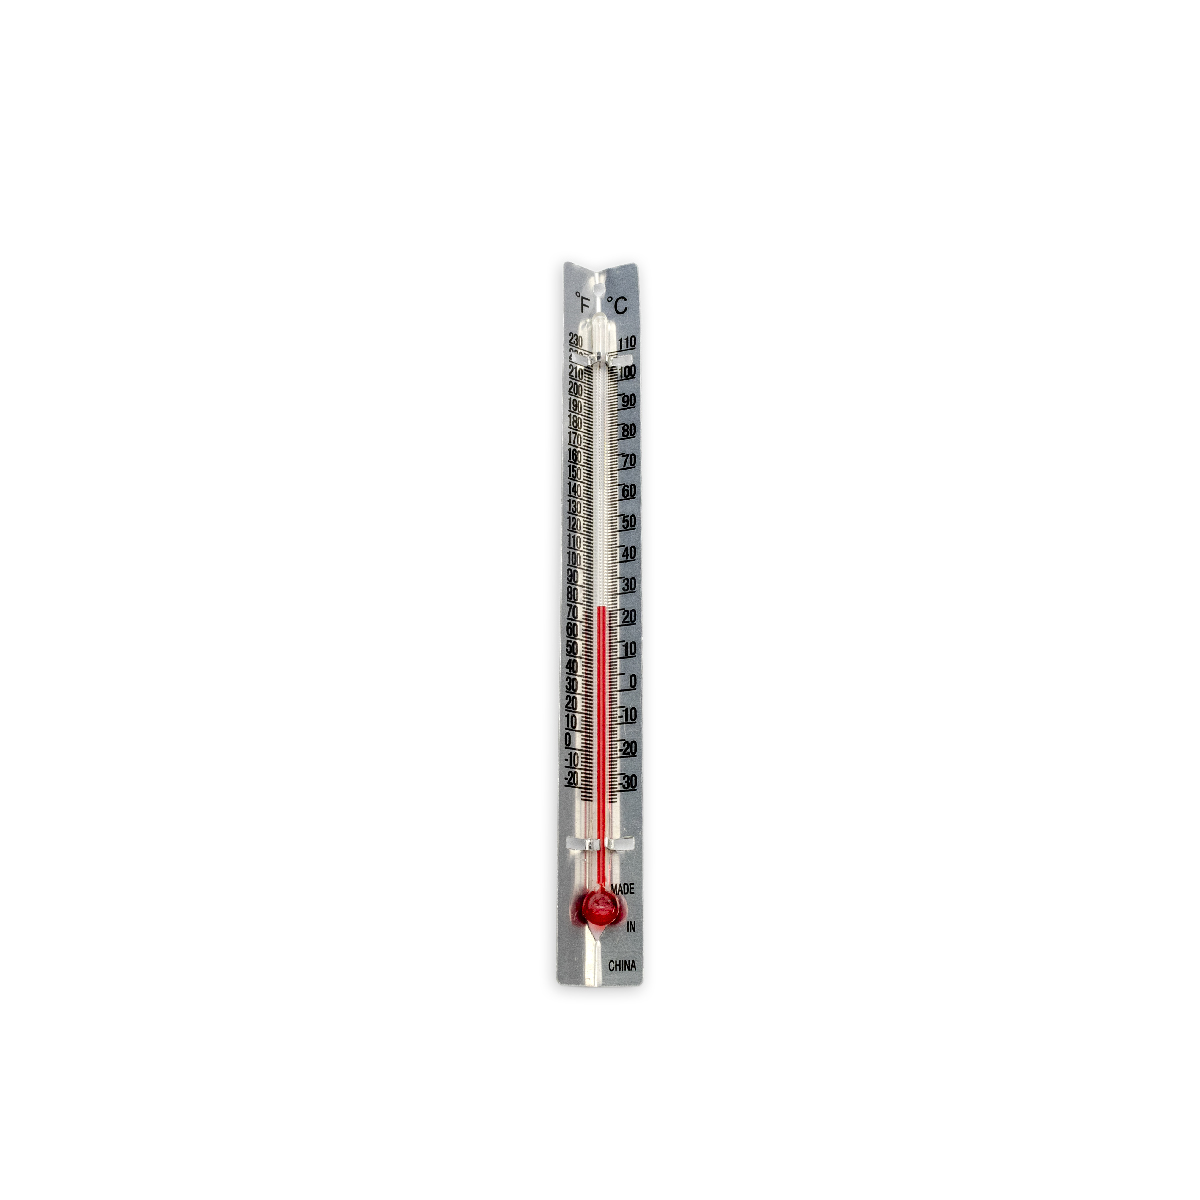 Room Thermometer with Flat Metal Back, Celsius - Fahrenheit